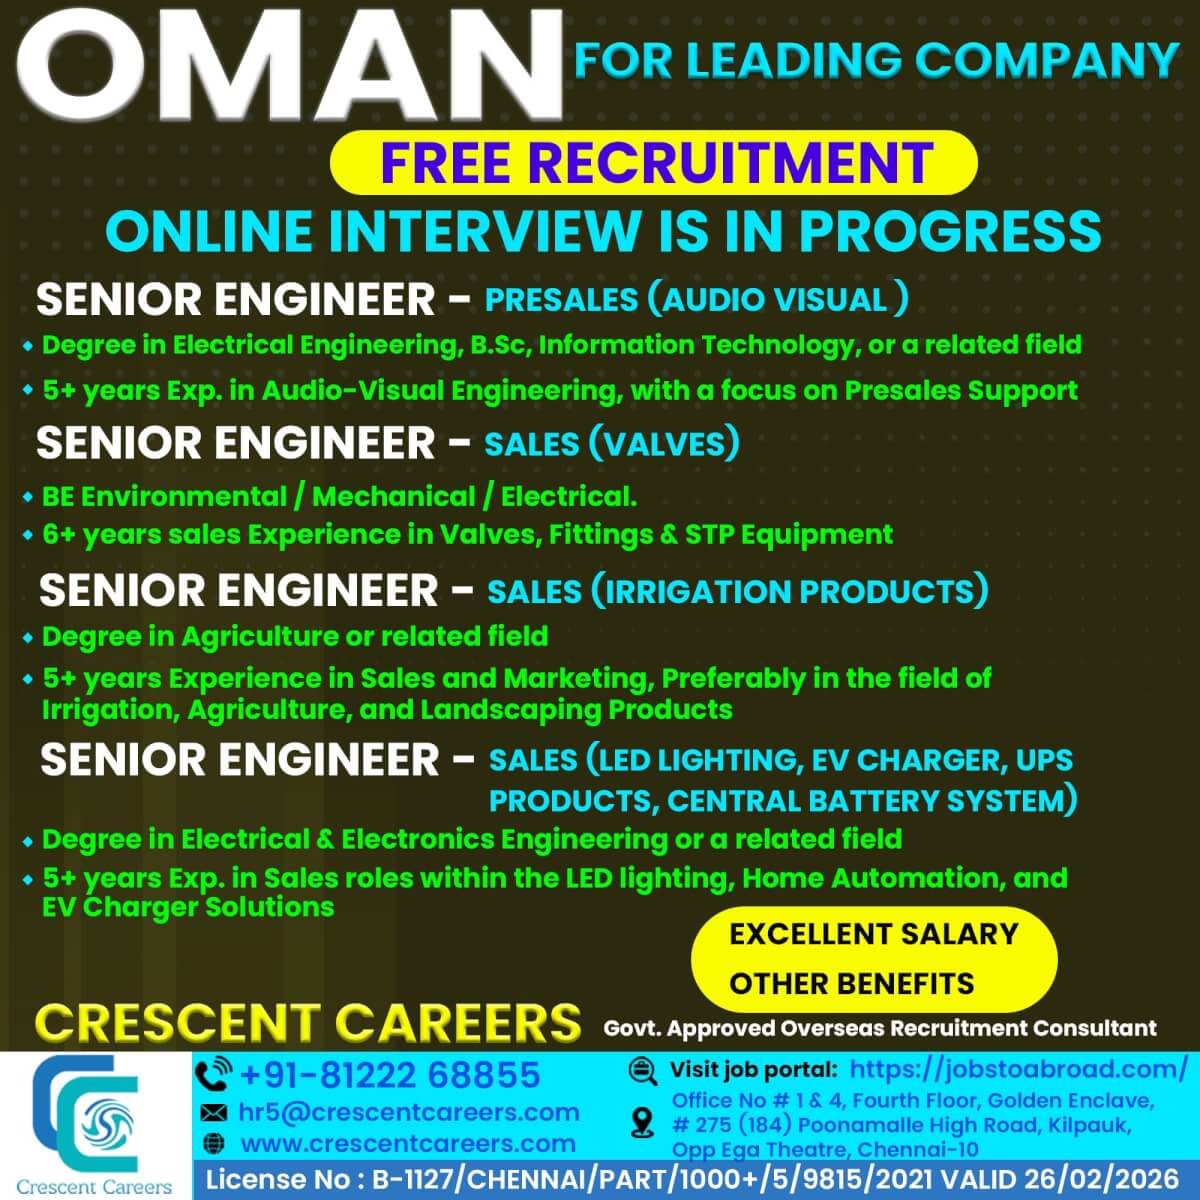 SENIOR ENGINEER IN Presales (Audio Visual ) / Sales (Valves) / Sales (Irrigation Products) / Sales (LED Lighting, EV Charger, UPS Products, Central Battery System)